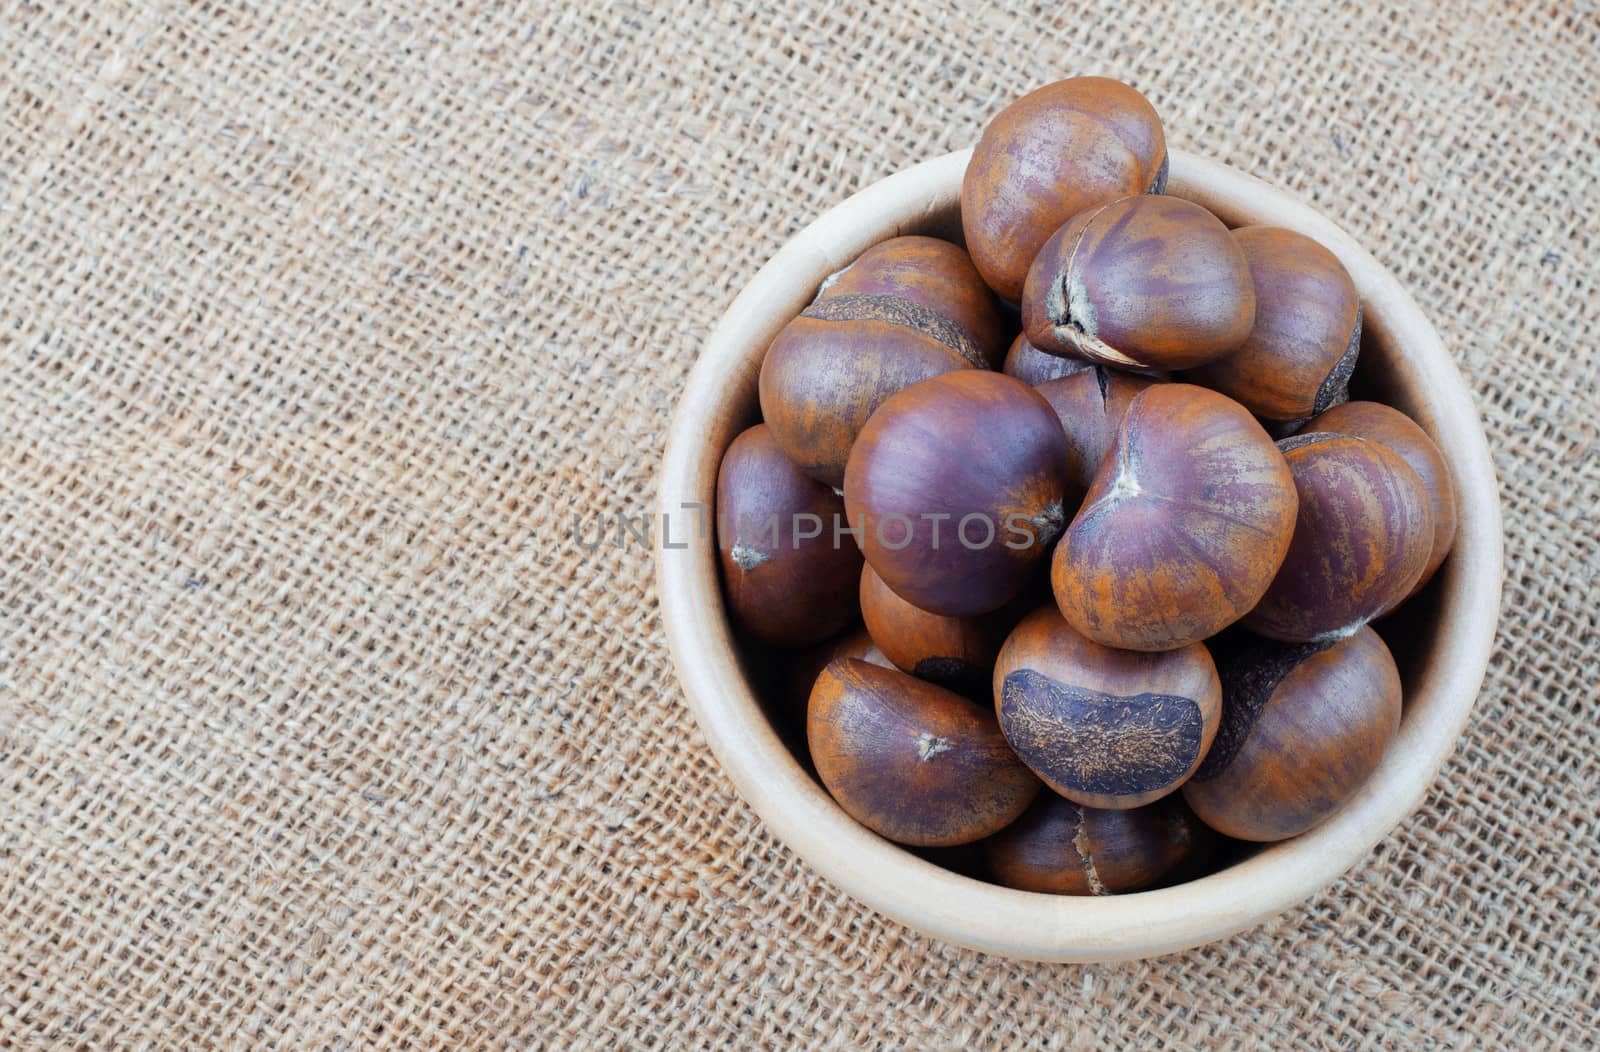 Chestnuts in a wooden bowl on sack.